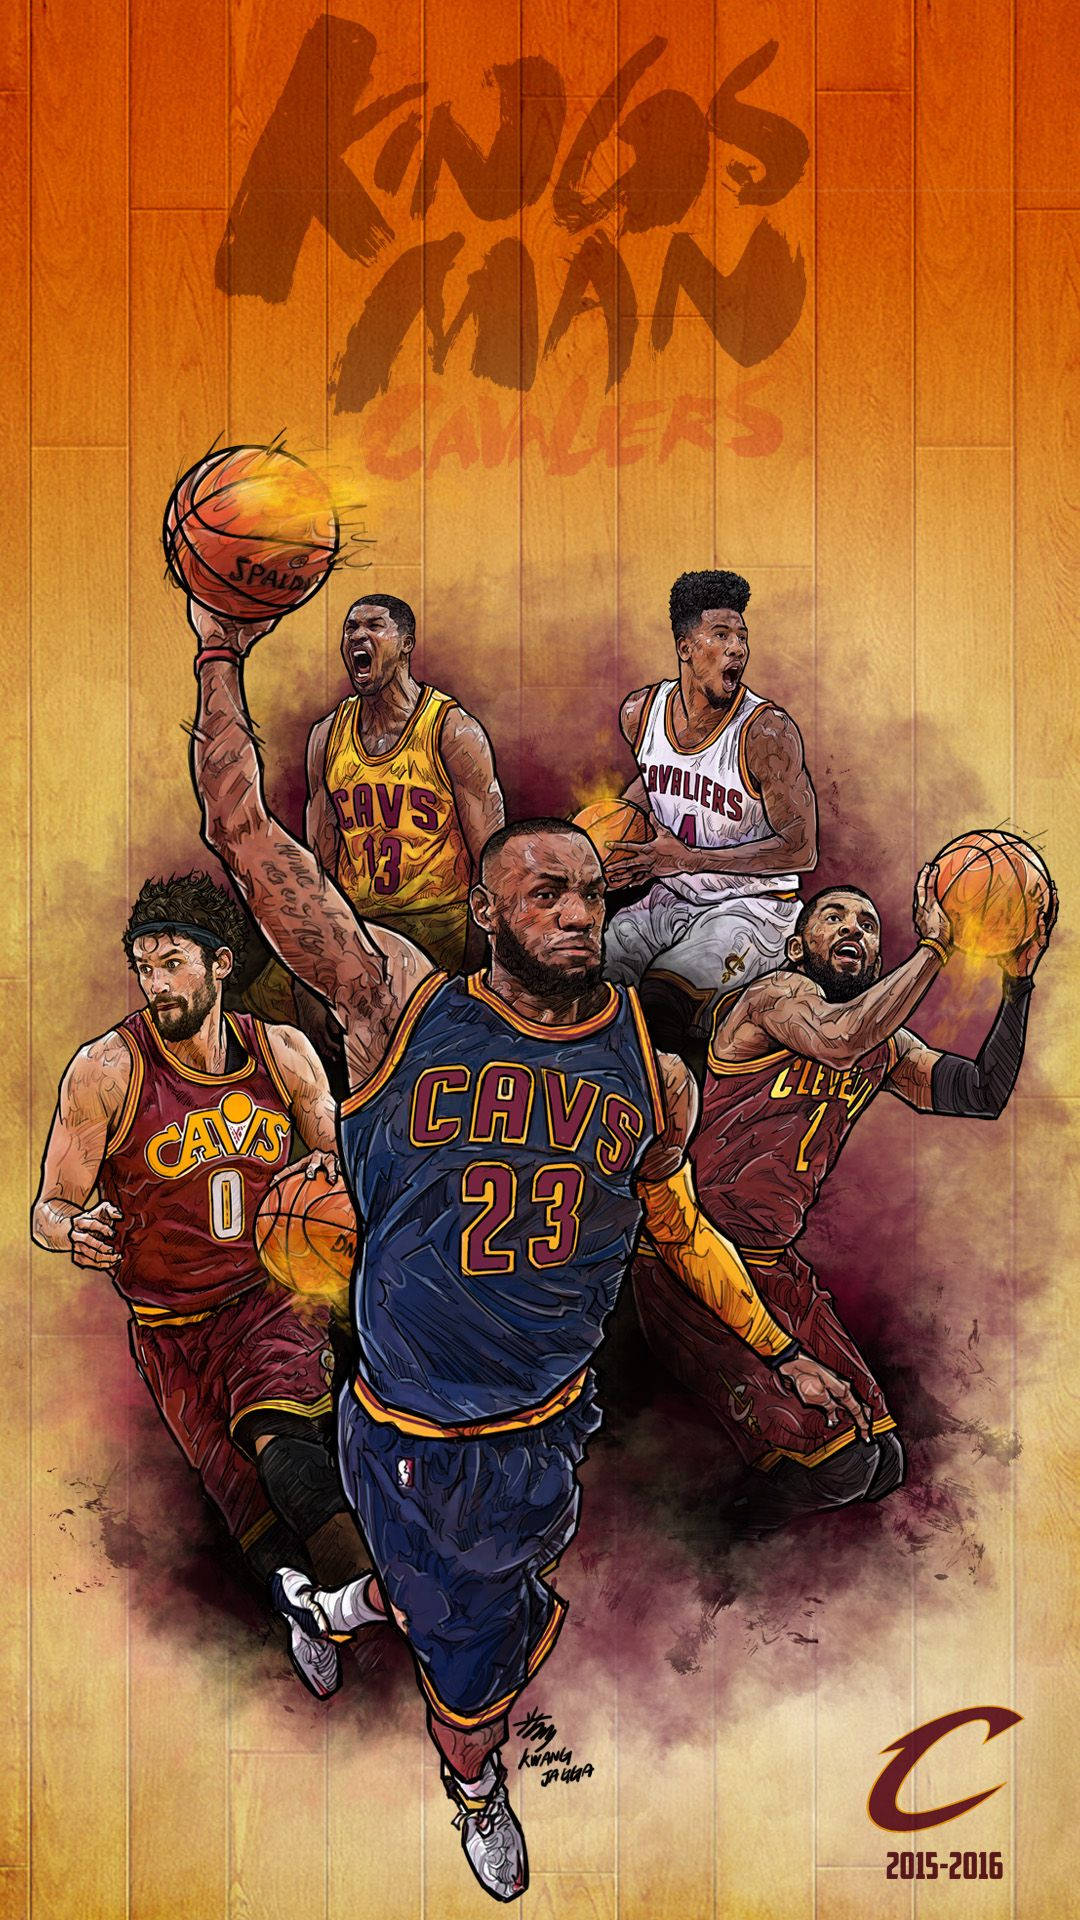 Free Nba Iphone Wallpaper Downloads, [200+] Nba Iphone Wallpapers for FREE  